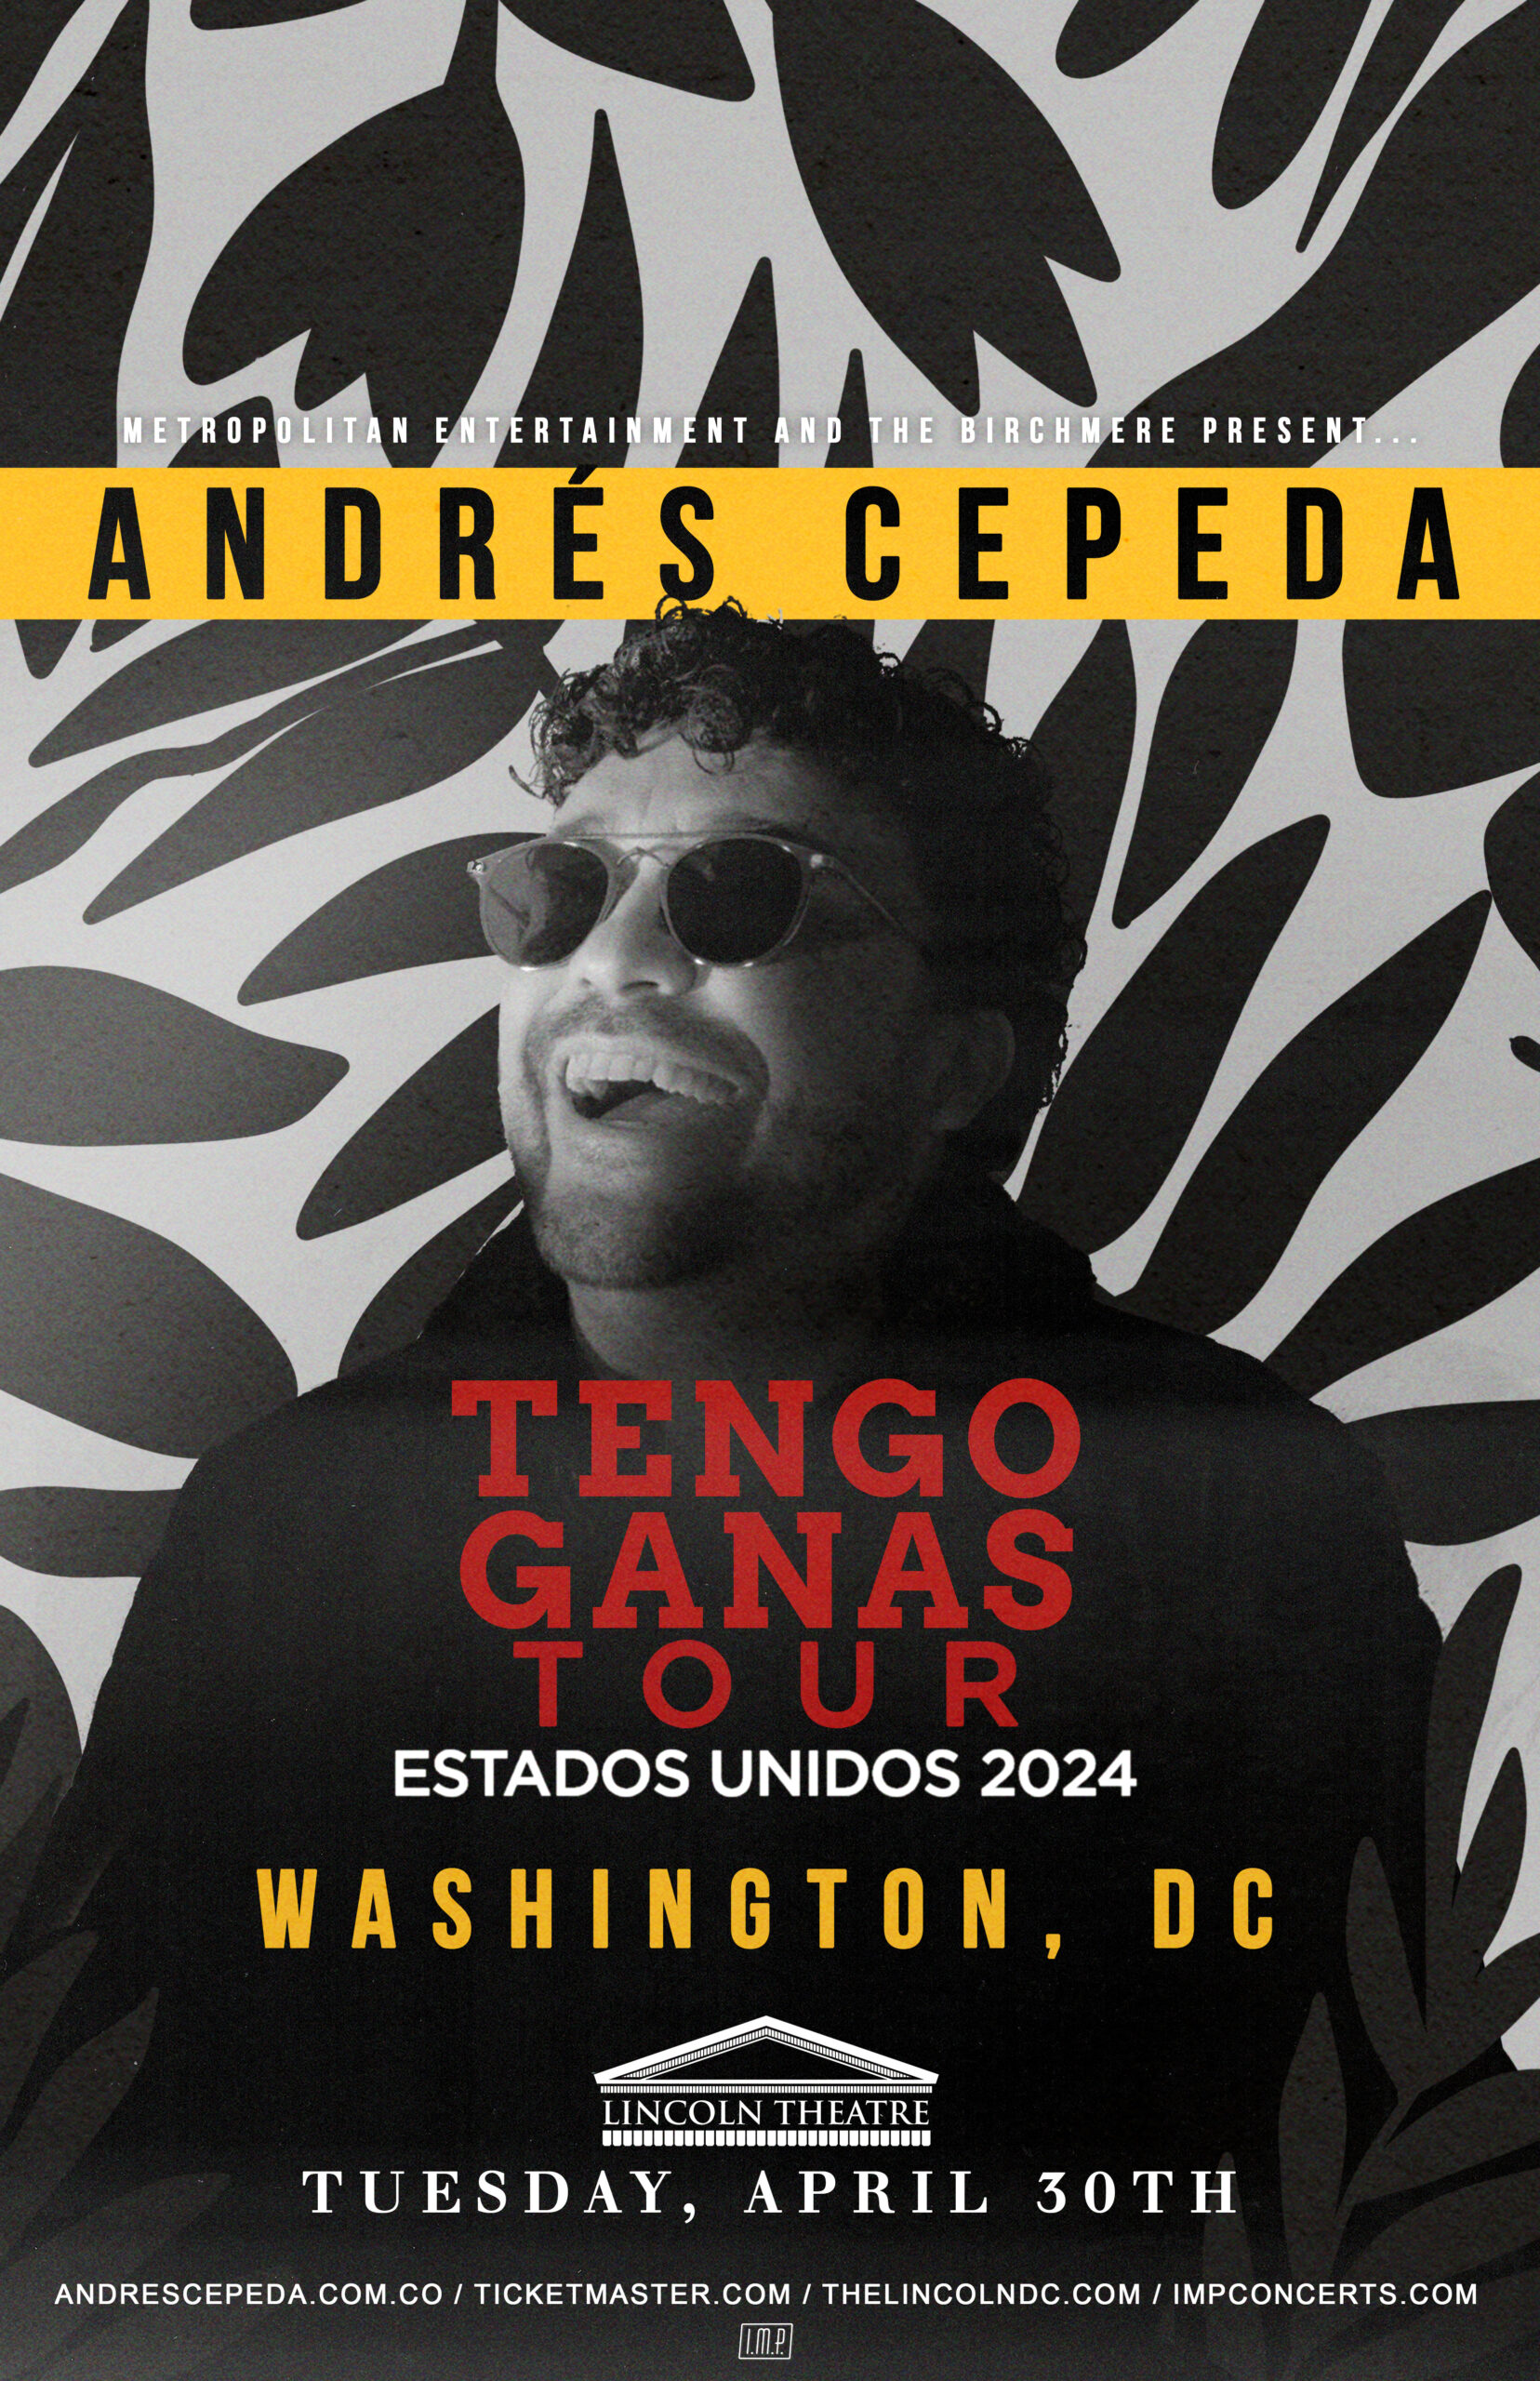 ANDRES CEPEDA Tengo Ganas Tour at the Lincoln Theatre in Washington, DC!